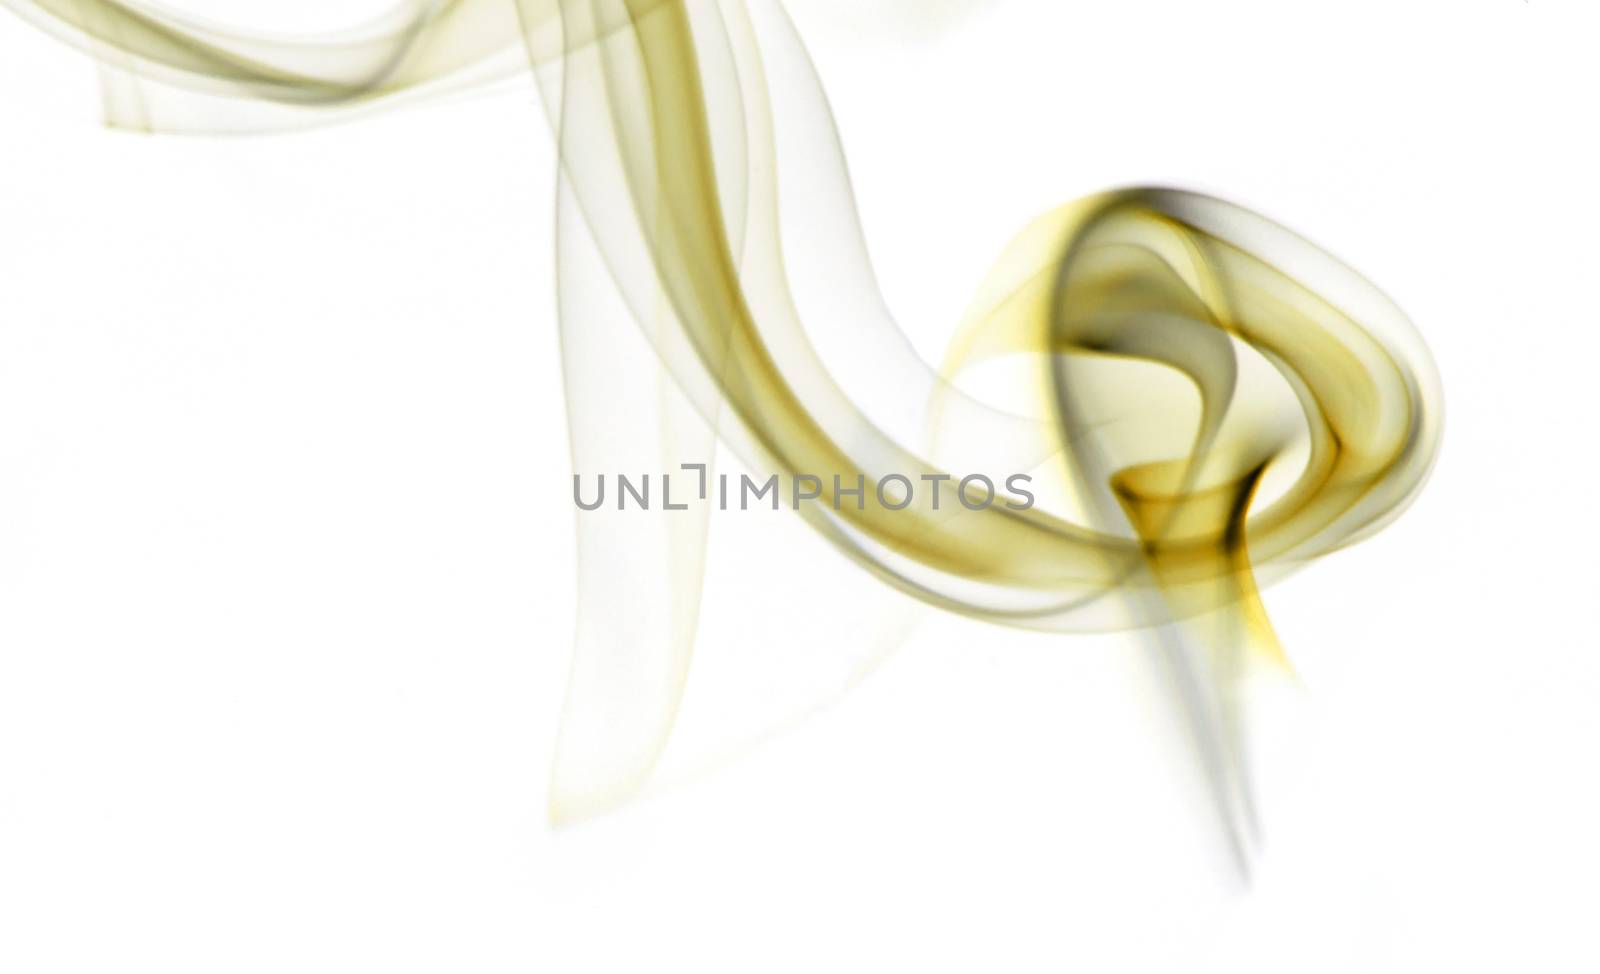 Yellow insence smoke on white background with free space for your text.